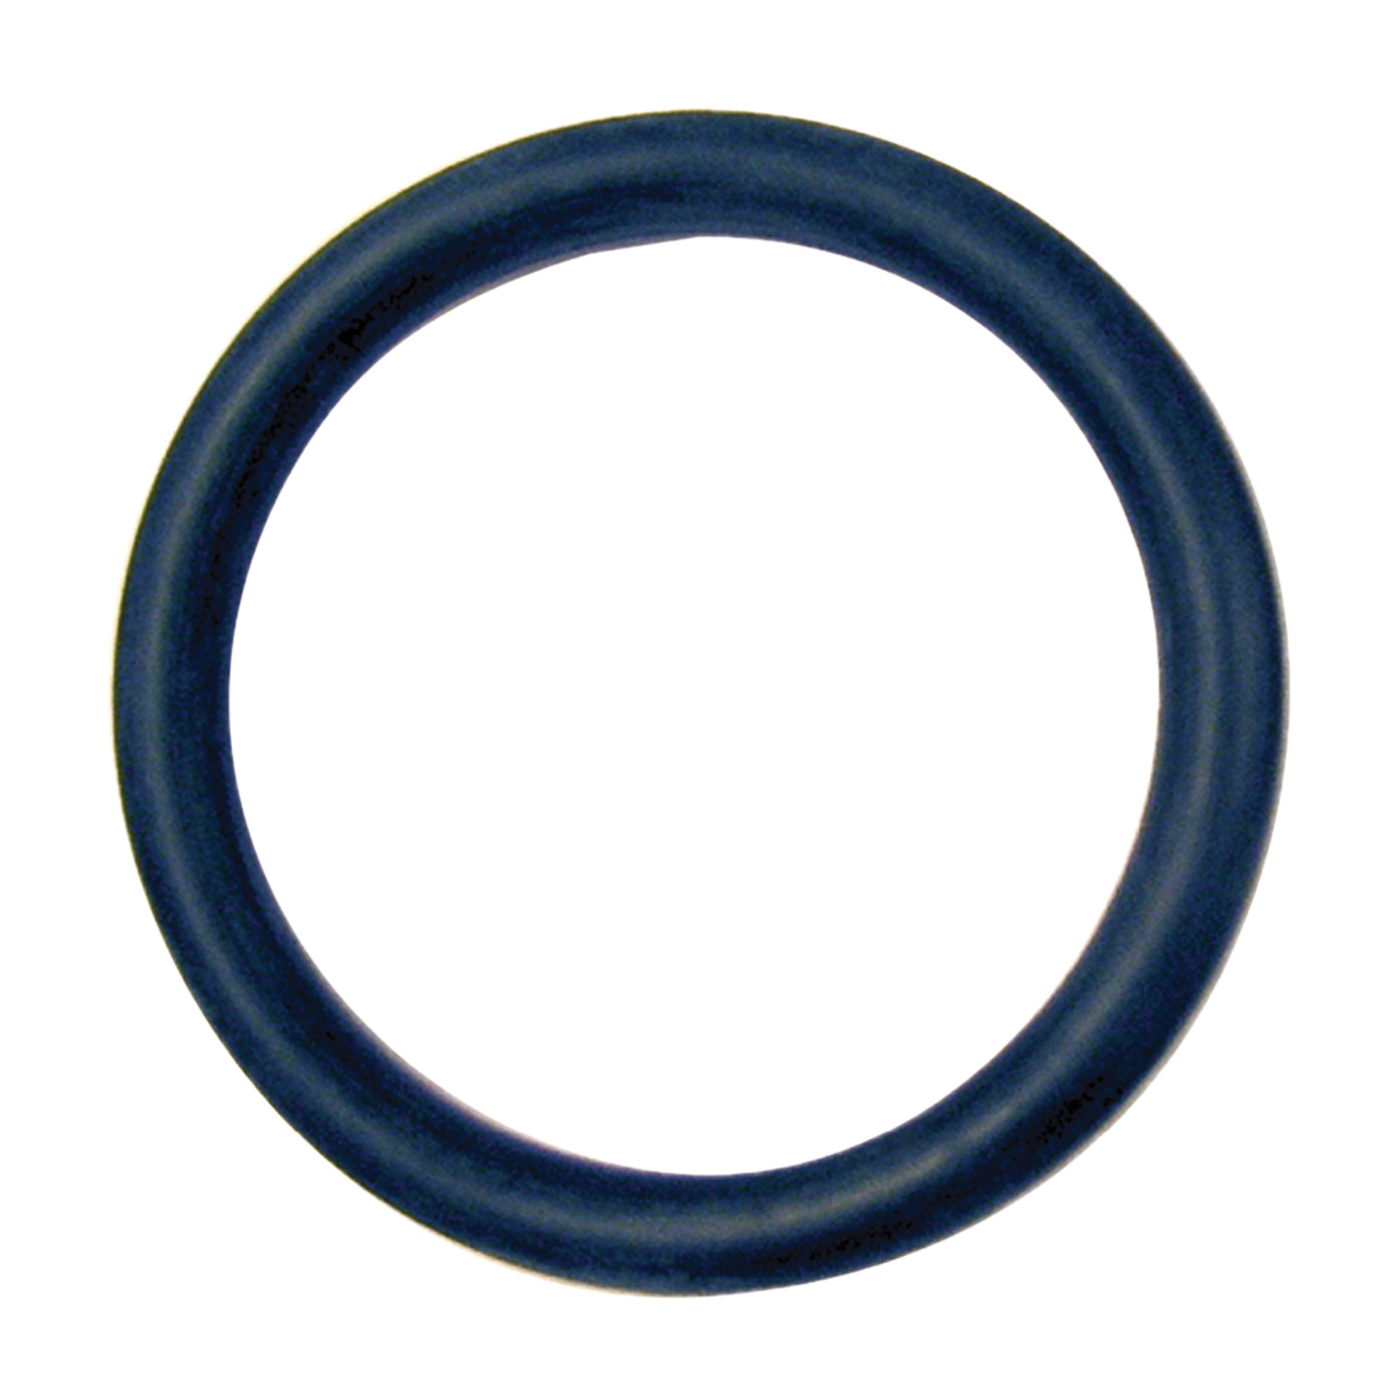 780055 Faucet O-Ring, 1-1/8 in ID x 1-1/4 in OD Dia, 1/16 in Thick